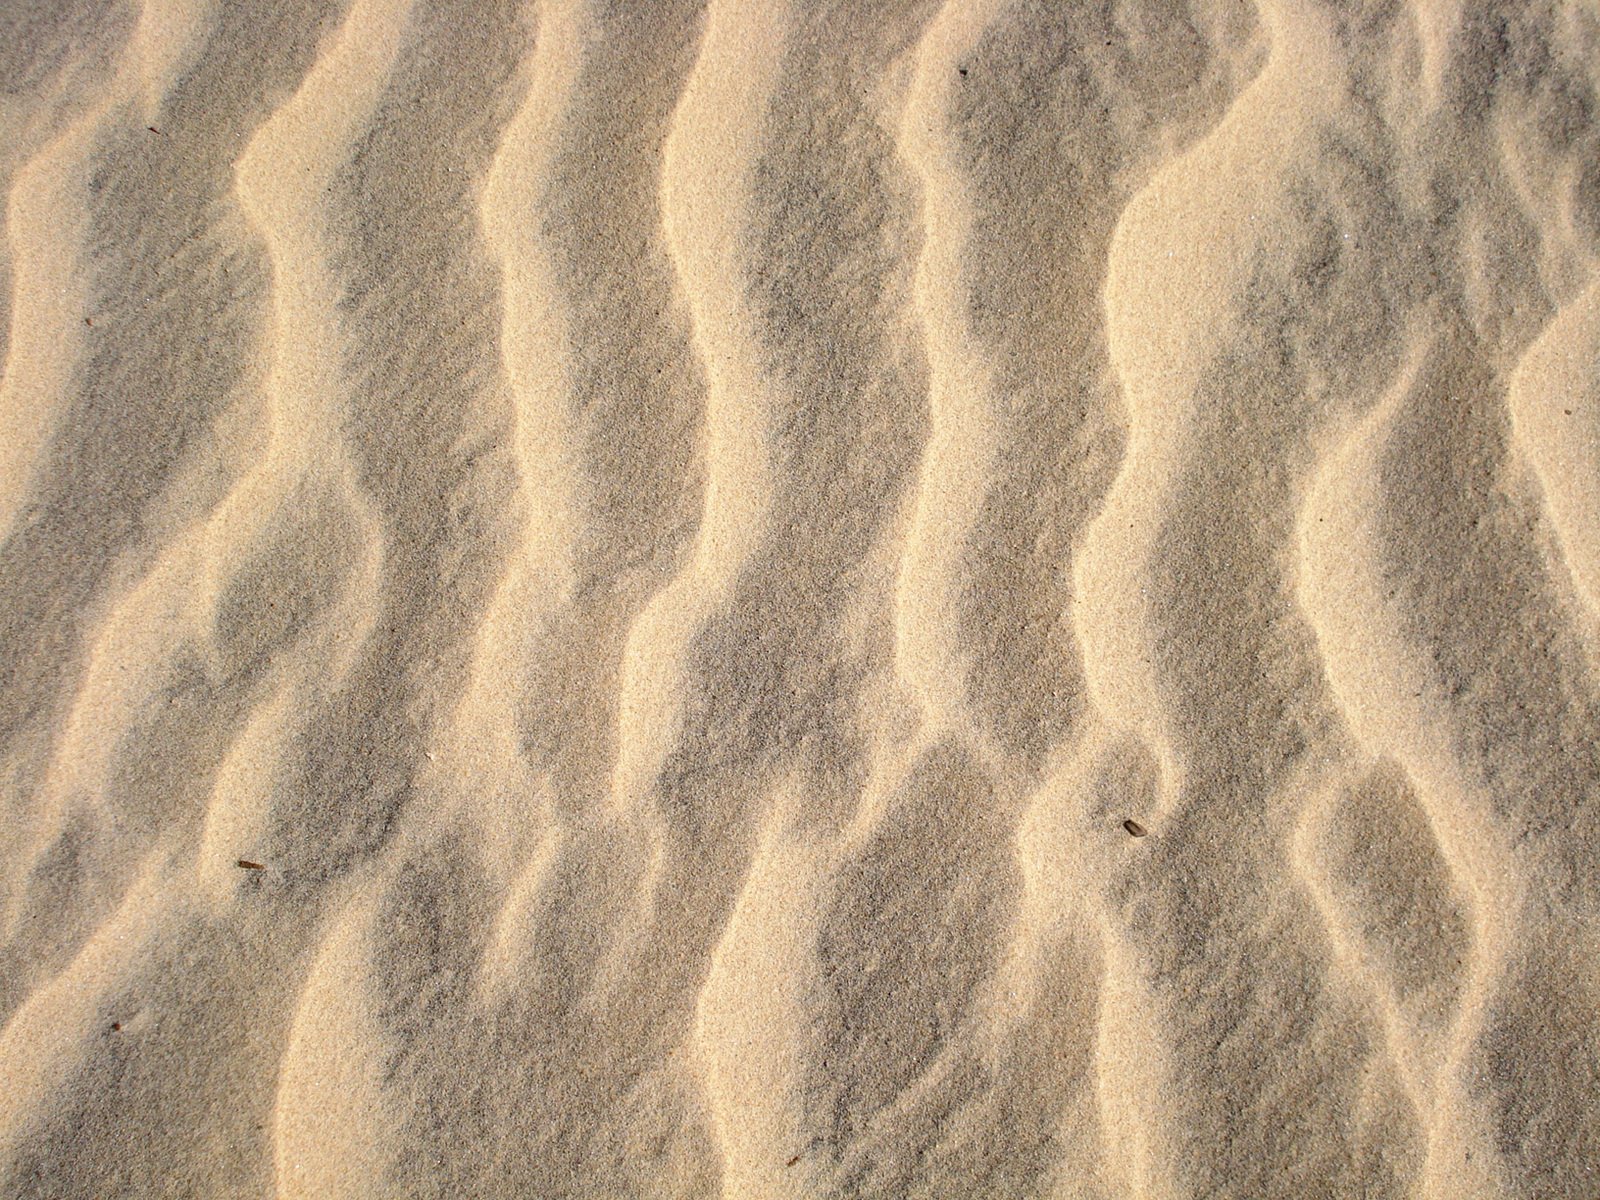 a close up of sand that looks like waves